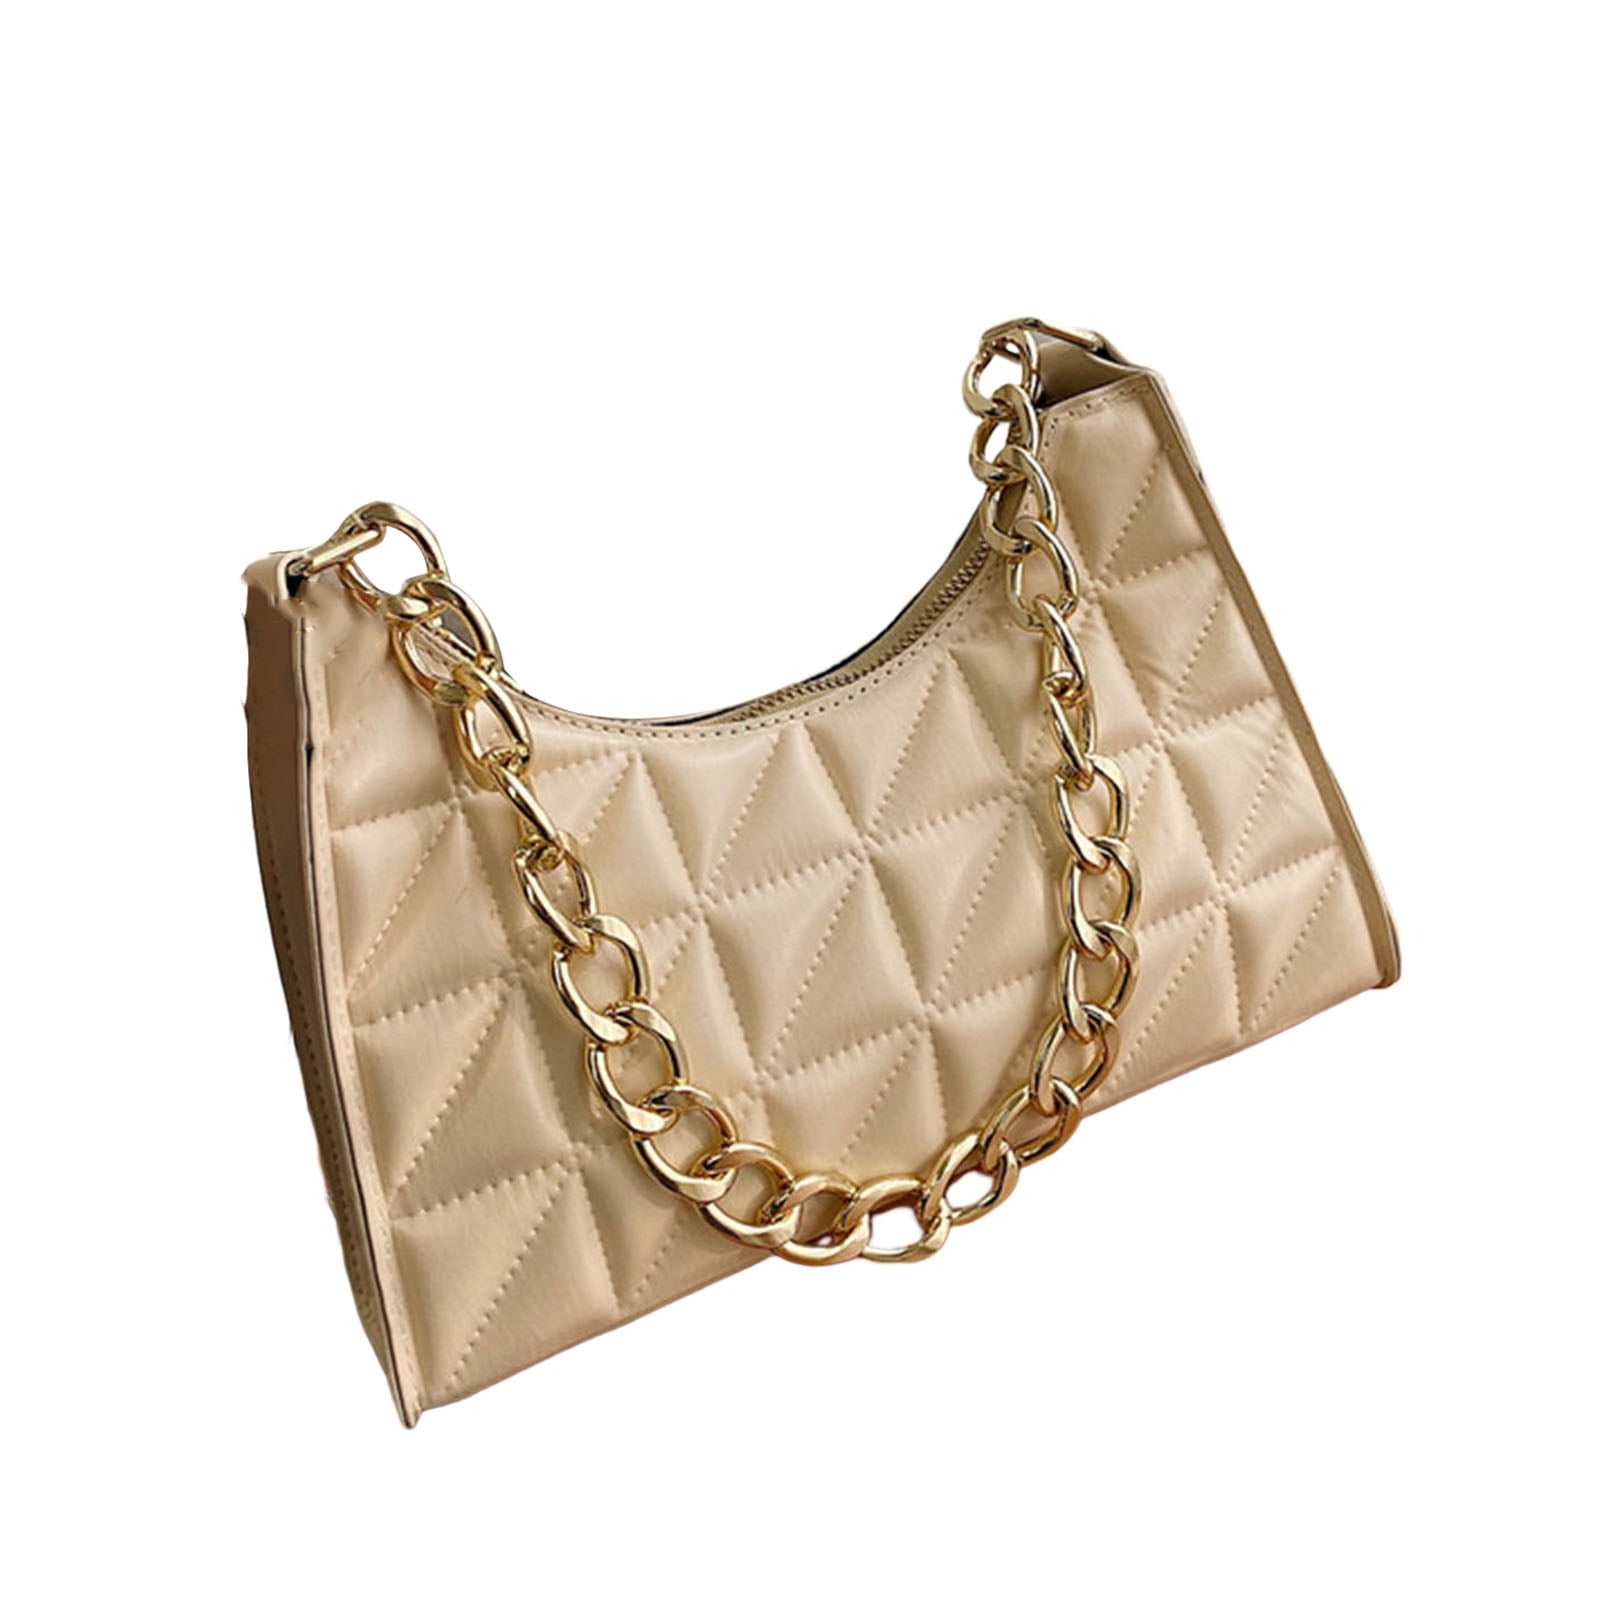 Kripyery Shoulder Bag One-shoulder Classic Chain Texture Smooth